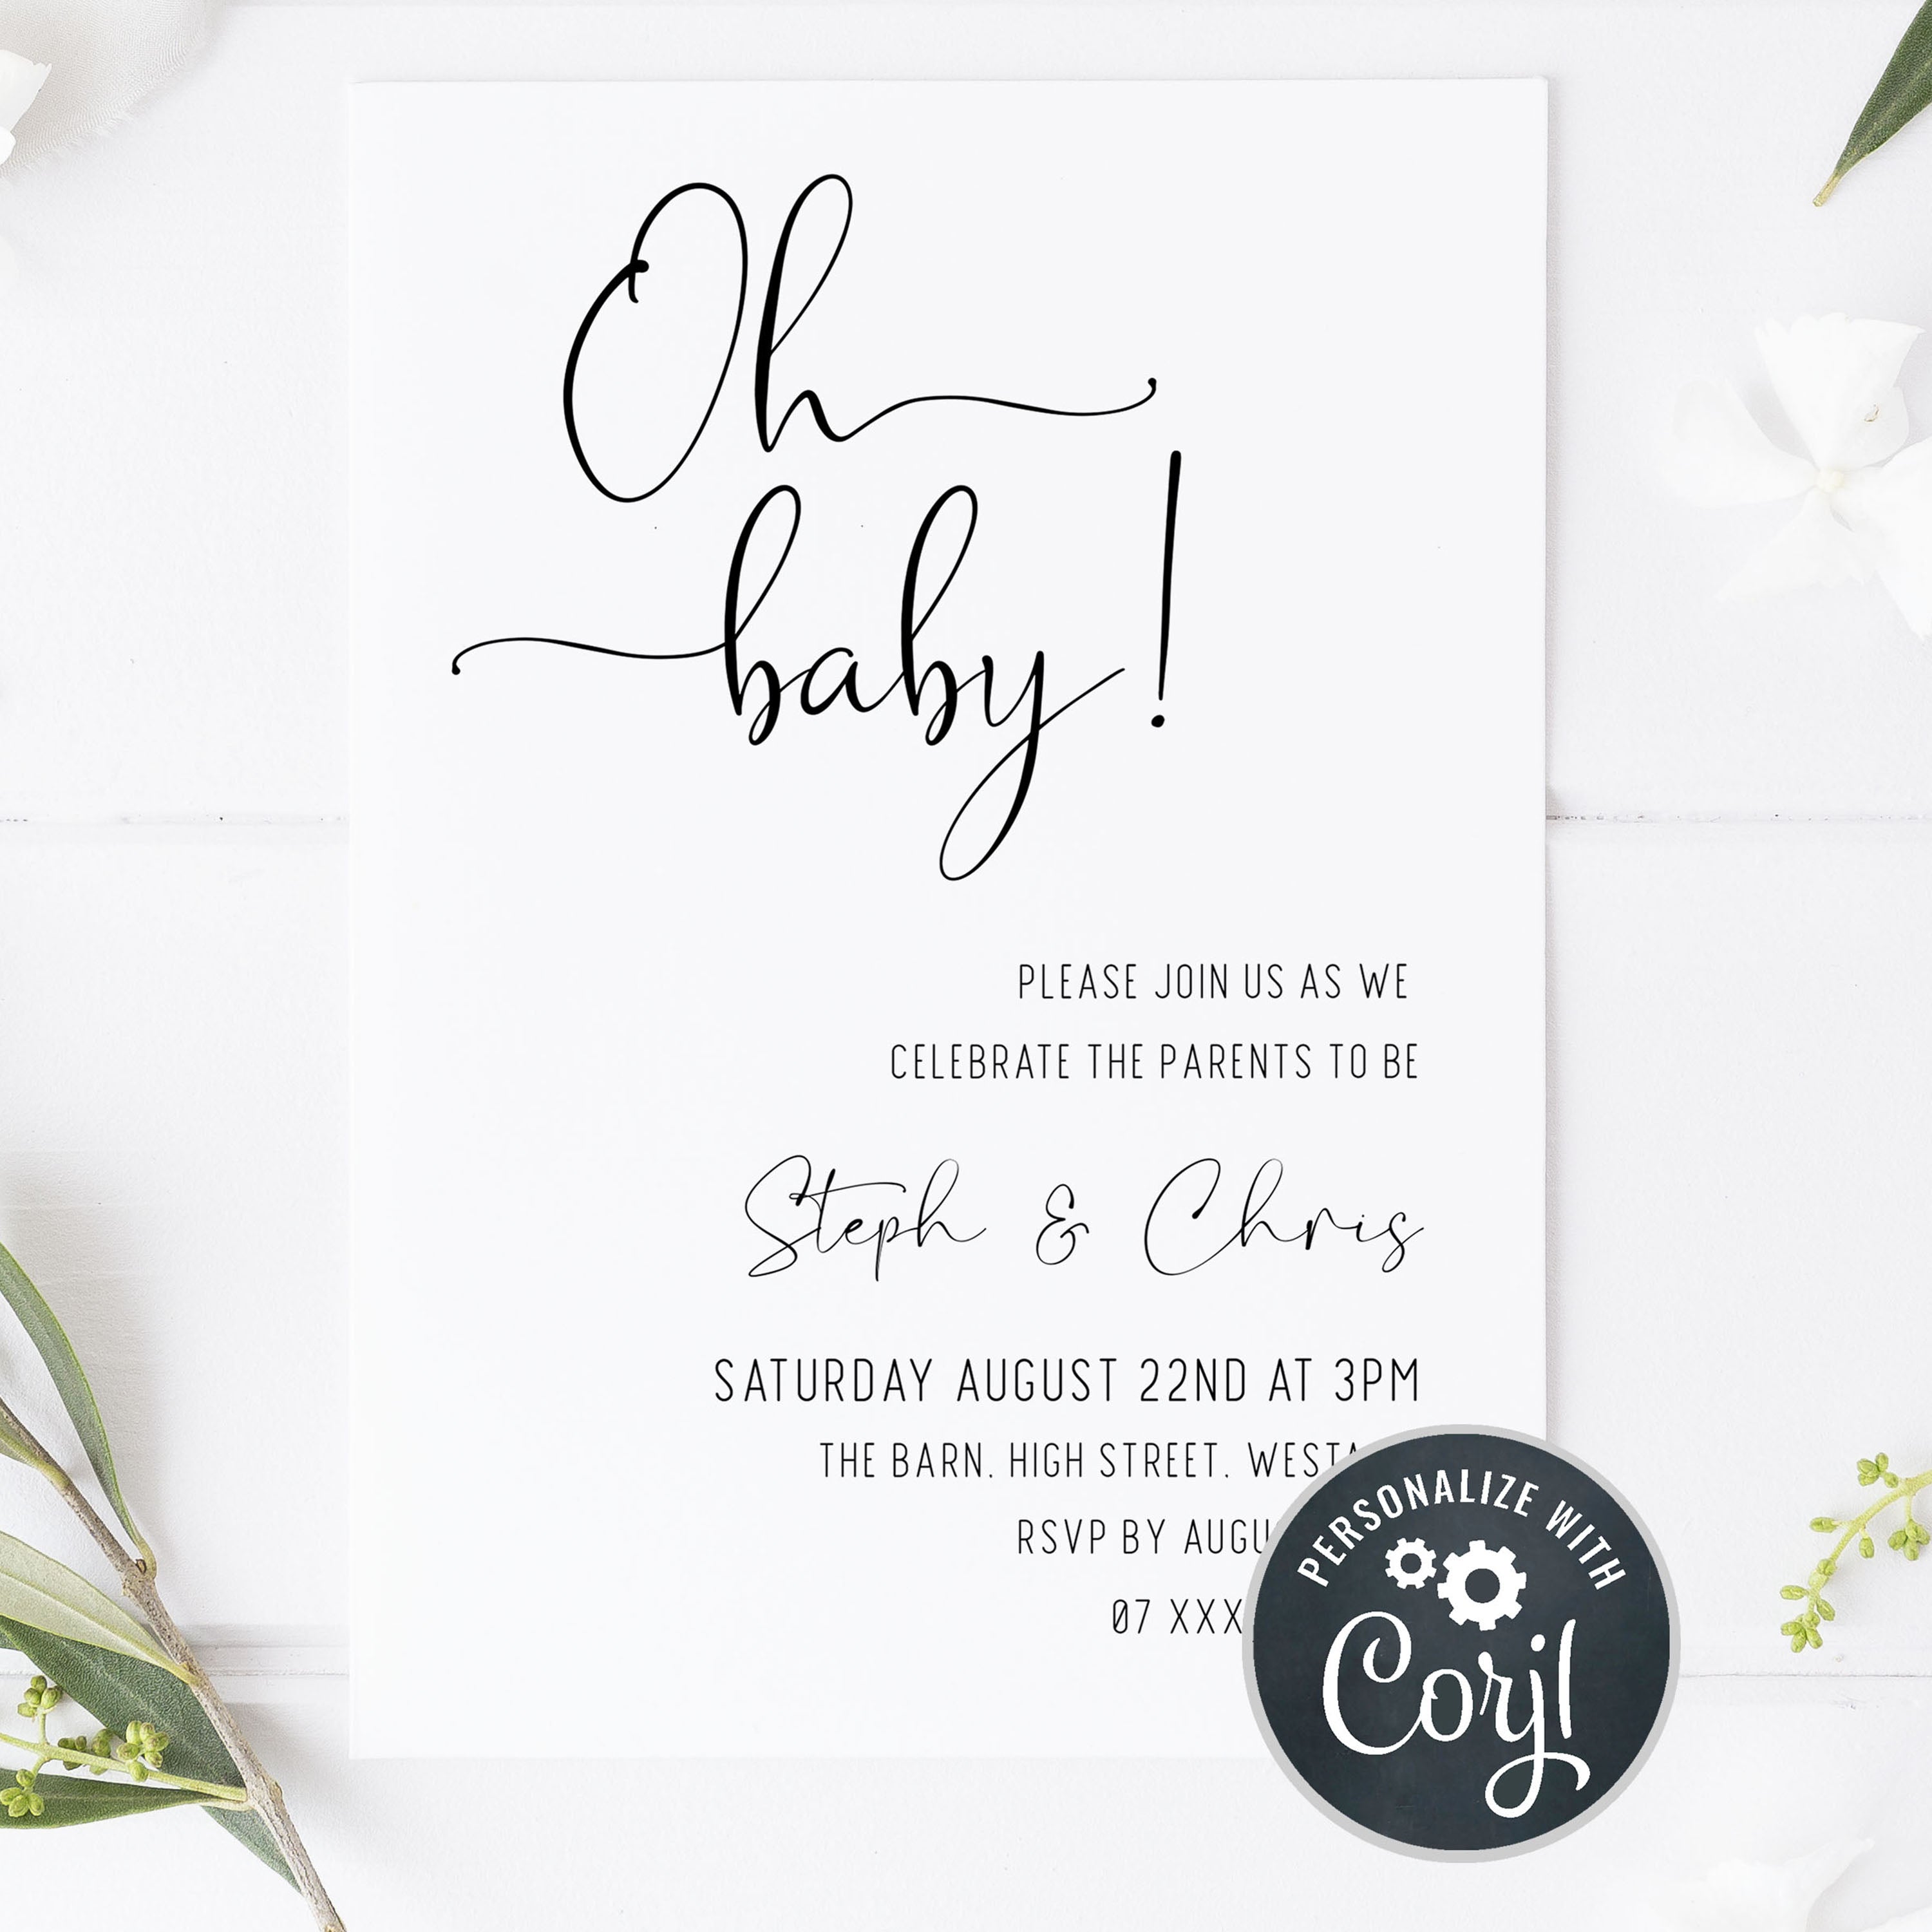 oh baby baby shower invitations, printable baby shower invitations, editable baby shower invites, minimalist baby shower